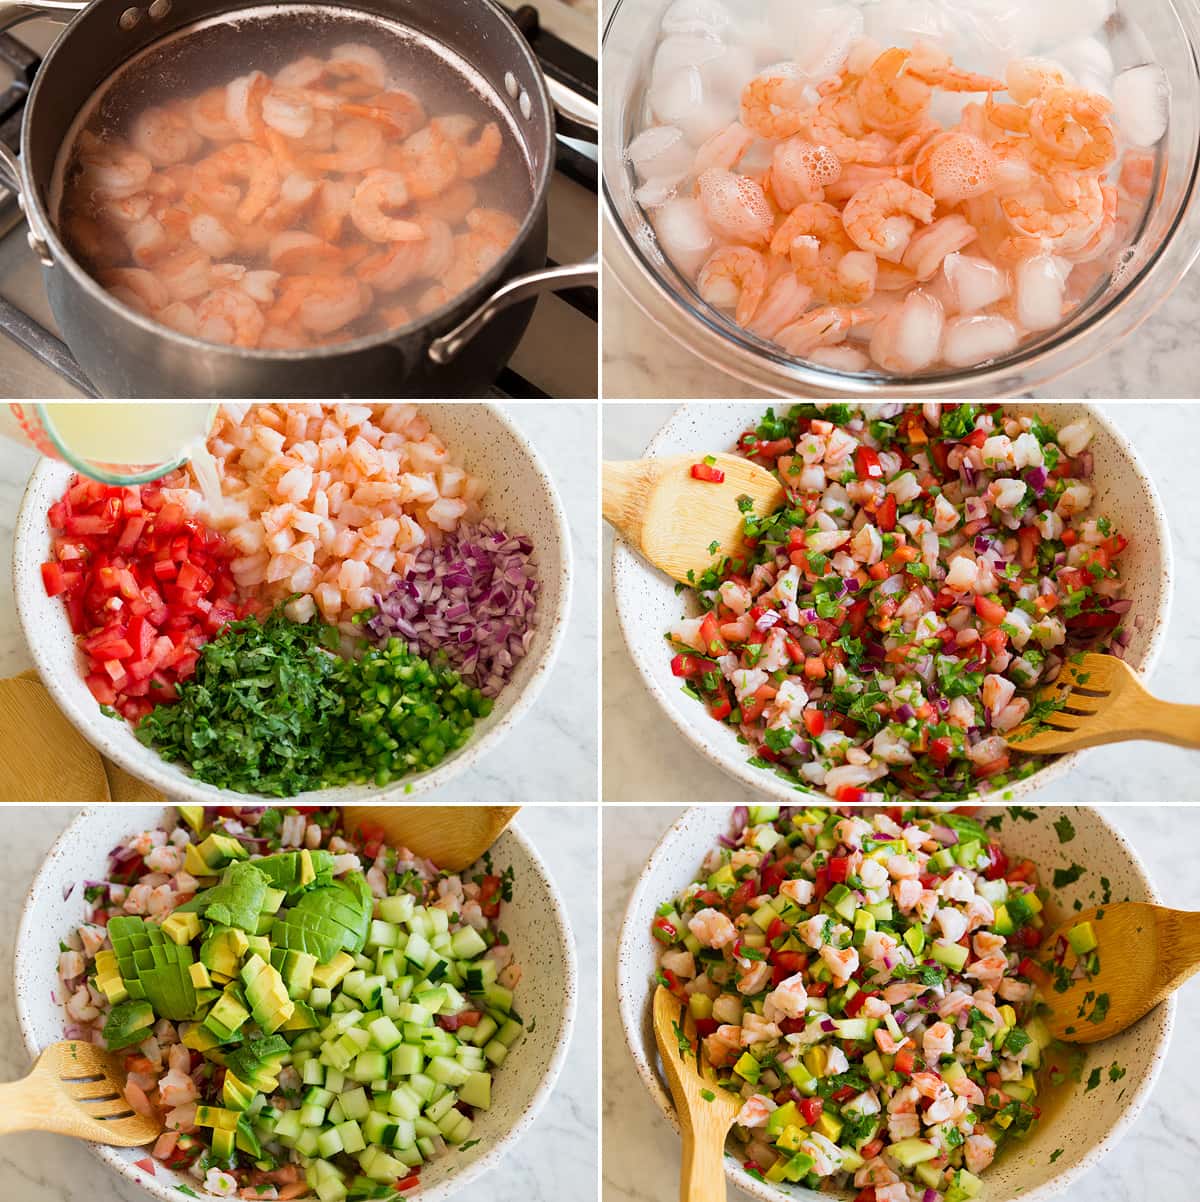 Ingredients to Make Ceviche